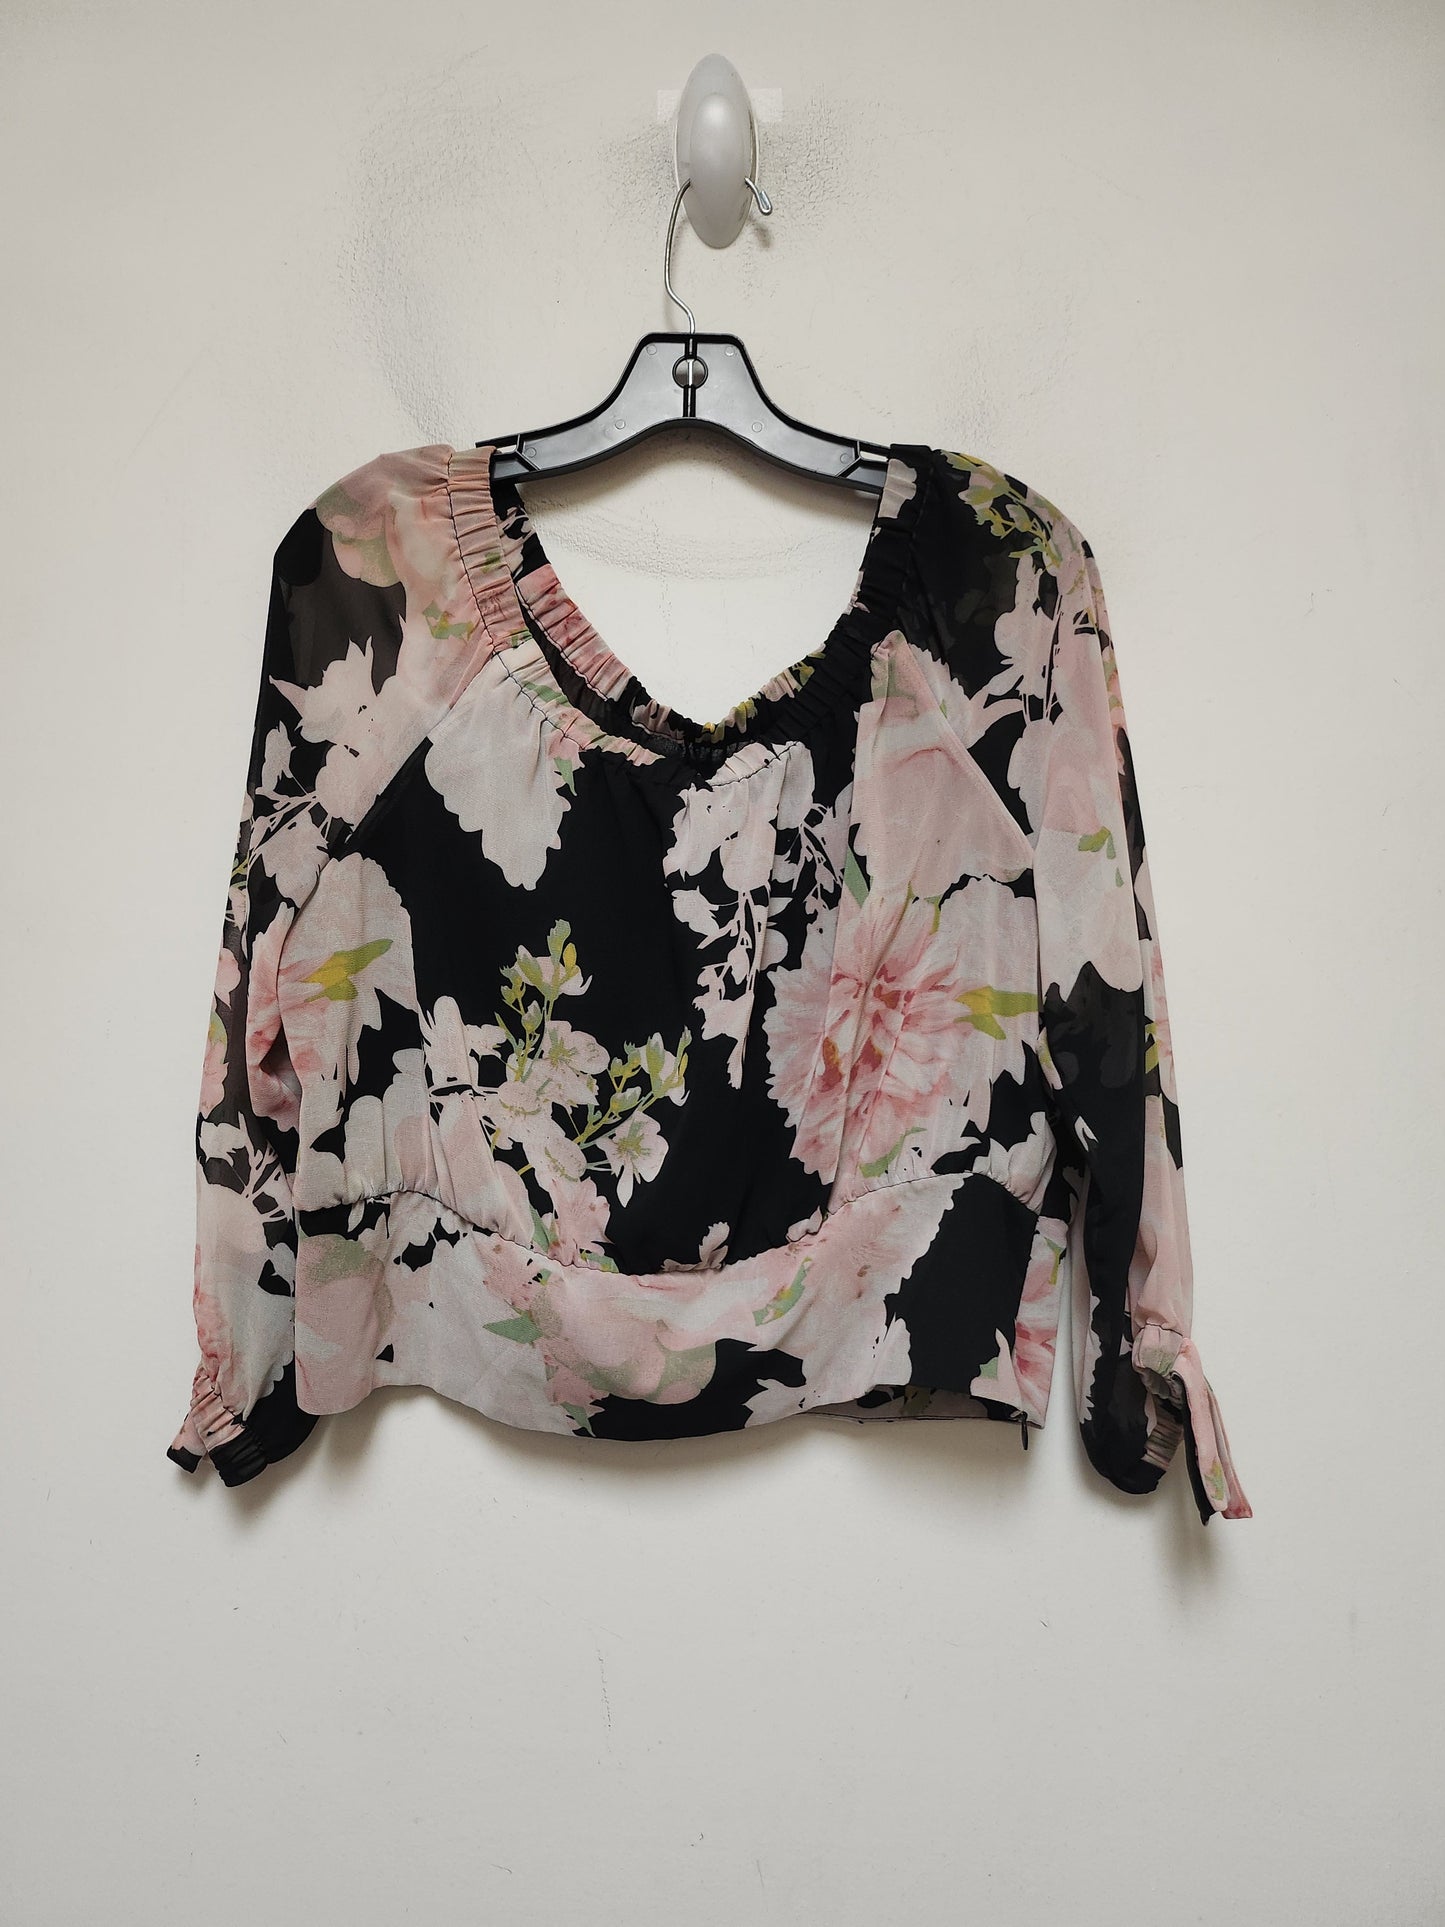 Floral Print Top Long Sleeve New York And Co, Size M